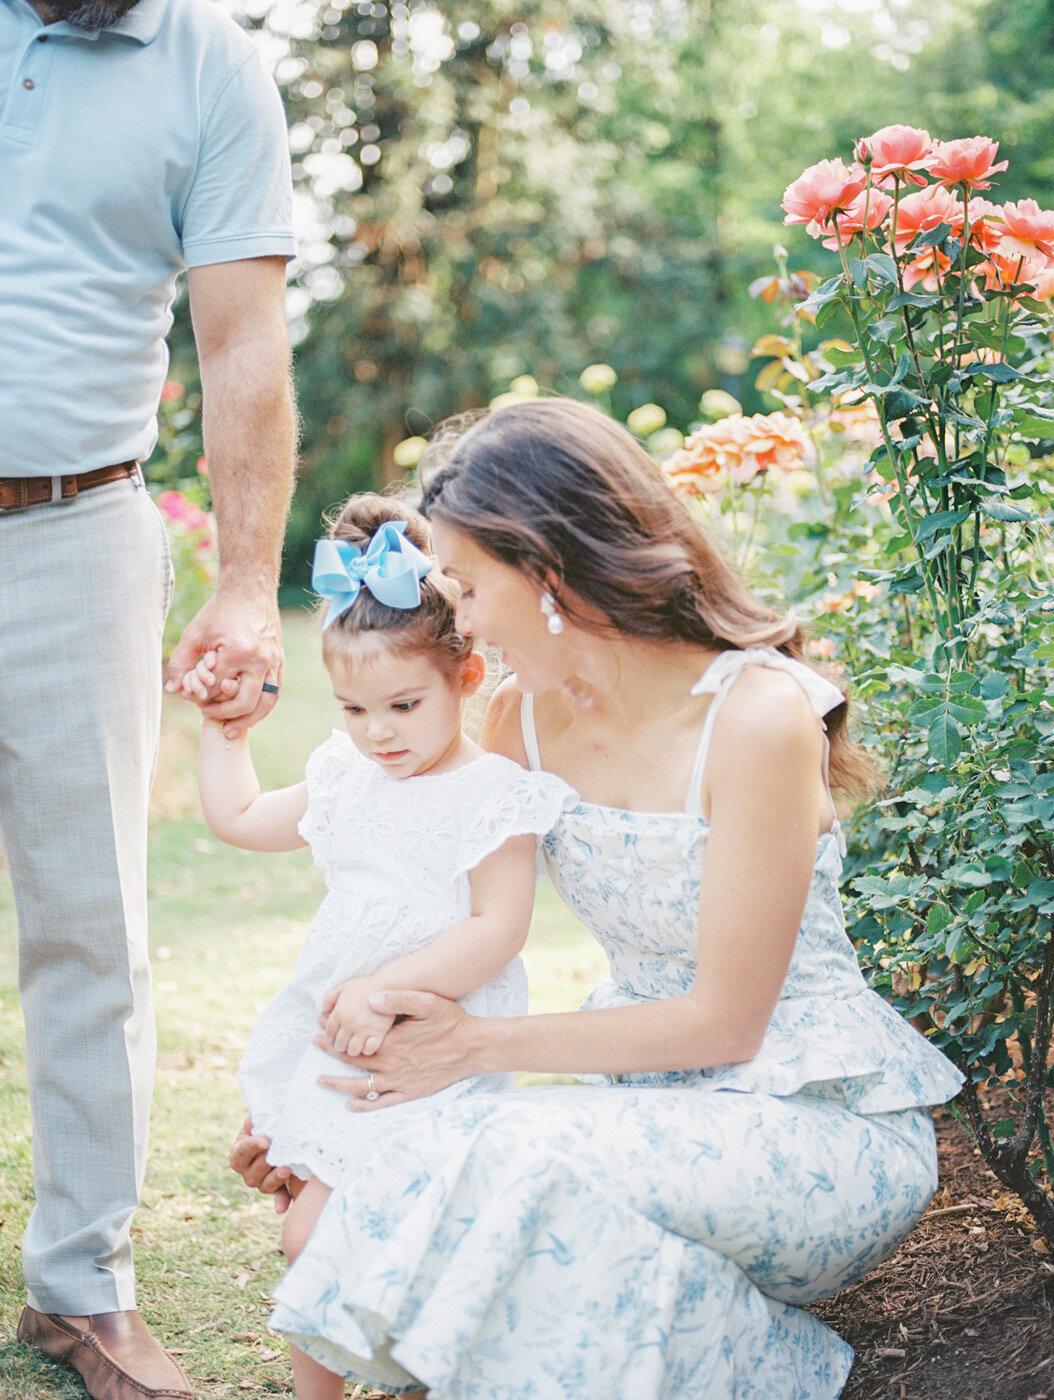 Raleigh Family Photographer | Jessica Agee Photography - 057